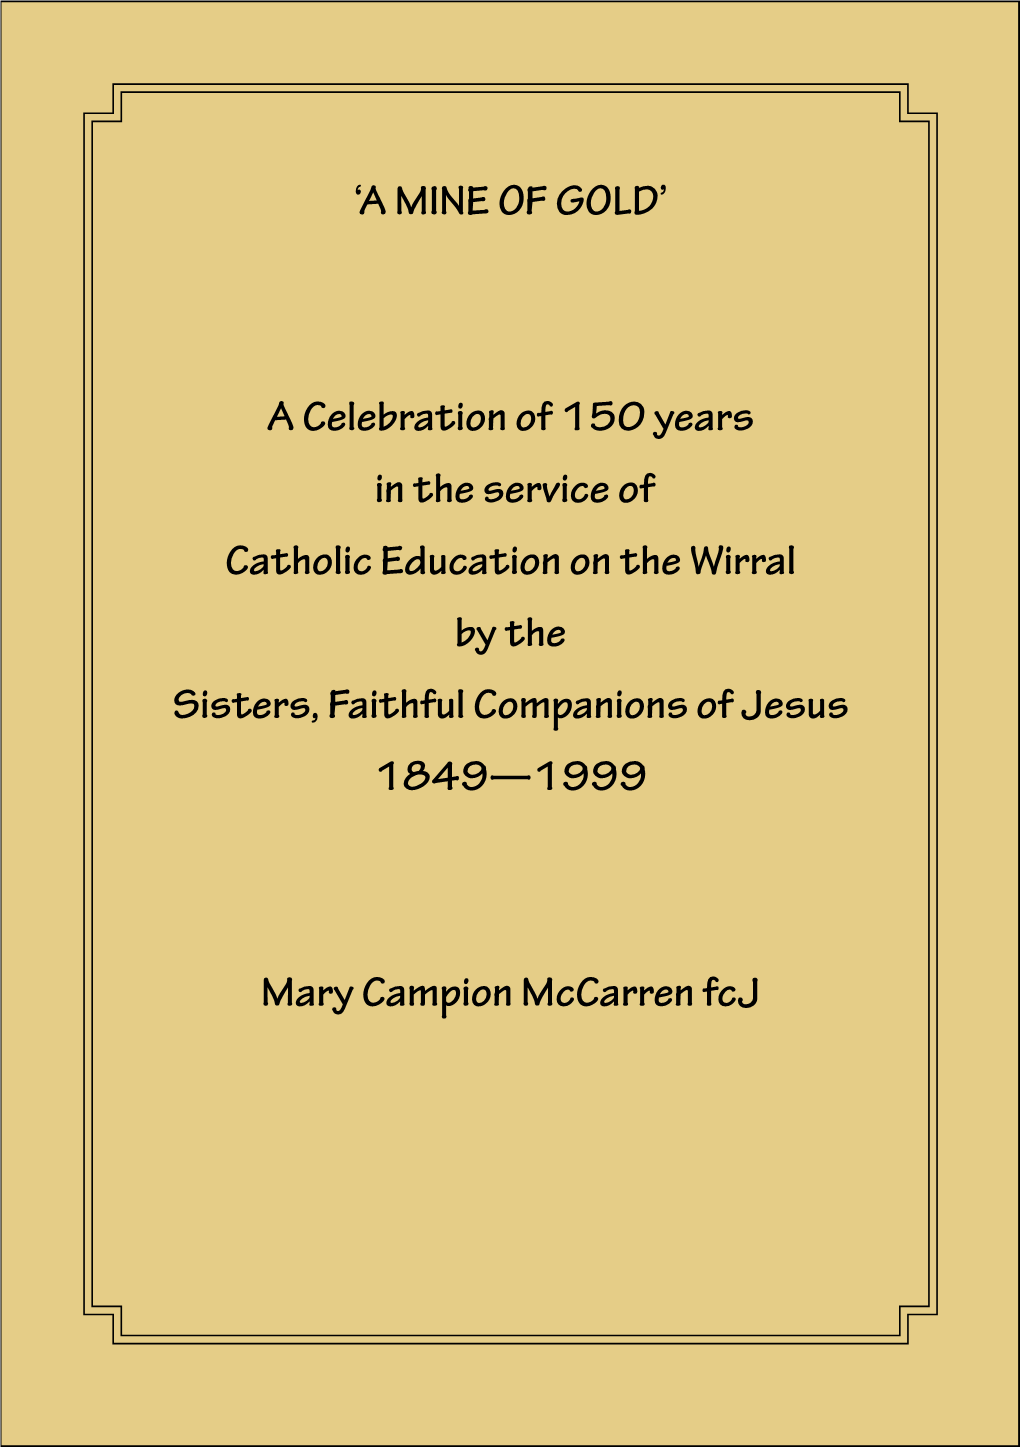 'A MINE of GOLD' a Celebration of 150 Years in the Service of Catholic